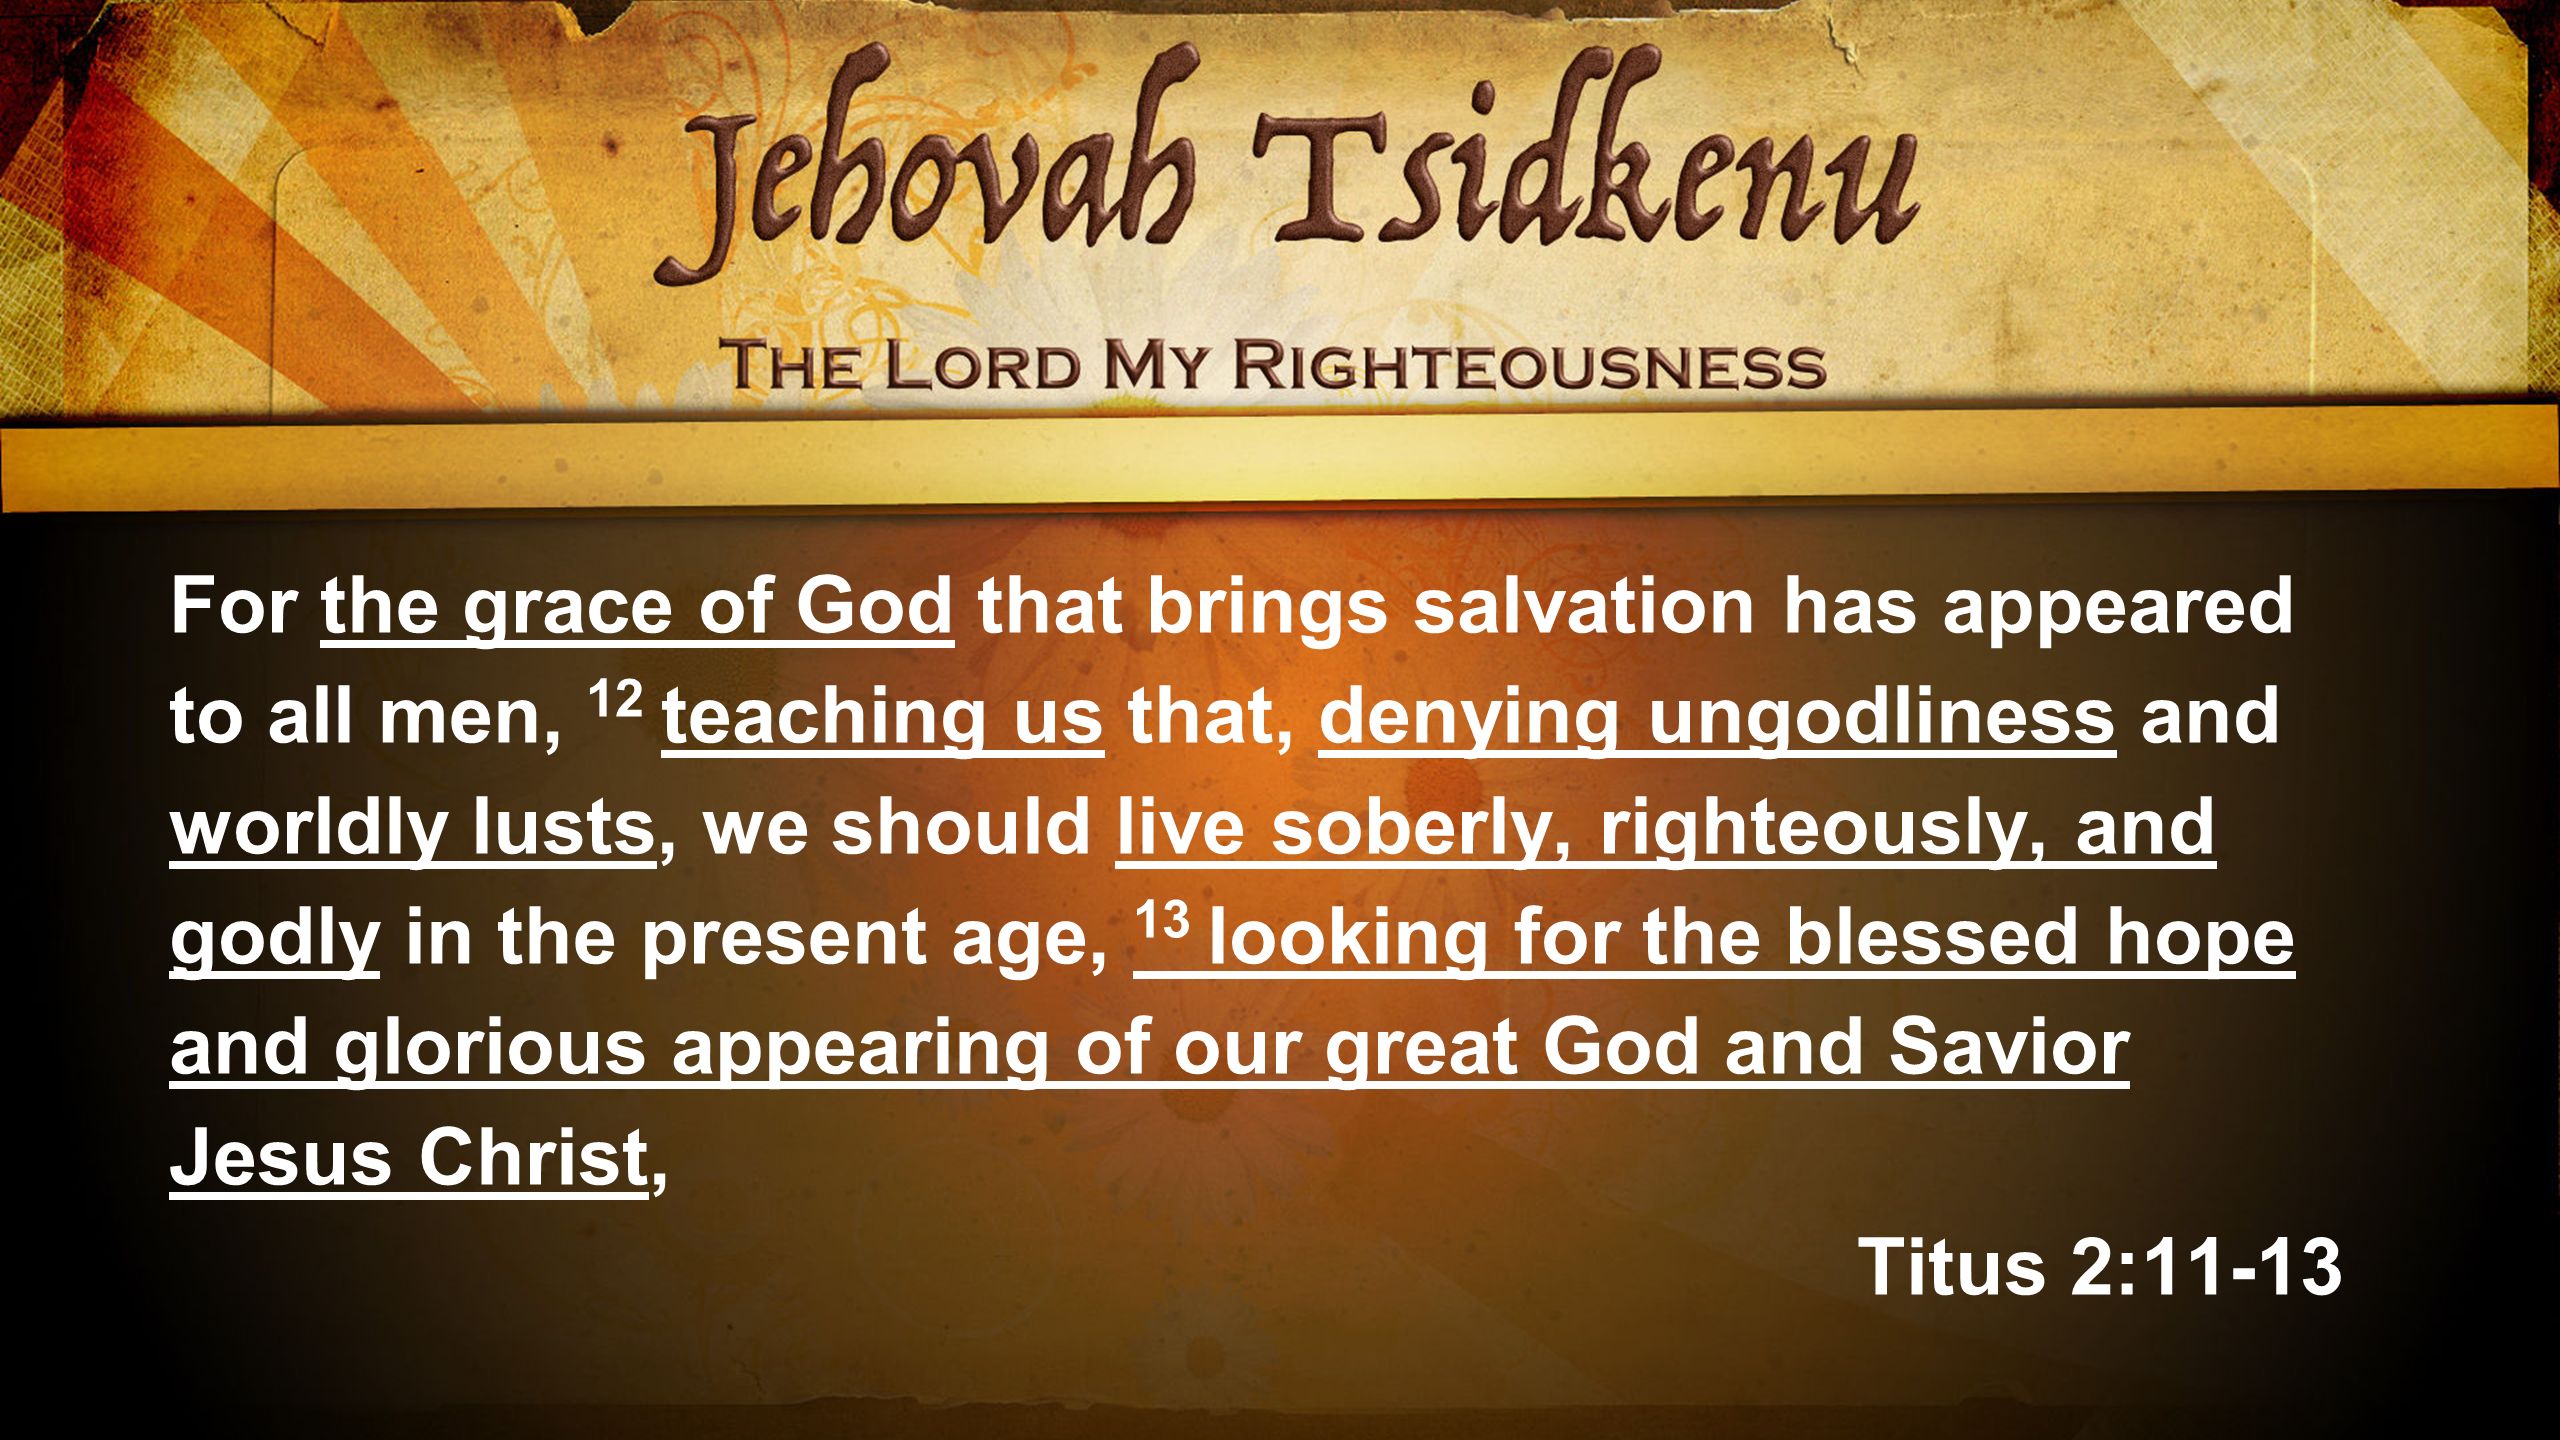 For the grace of God that brings salvation has appeared to all men, 12 teaching us that, denying ungodliness and worldly lusts, we should live soberly, righteously, and godly in the present age, 13 looking for the blessed hope and glorious appearing of our great God and Savior Jesus Christ, Titus 2:11-13